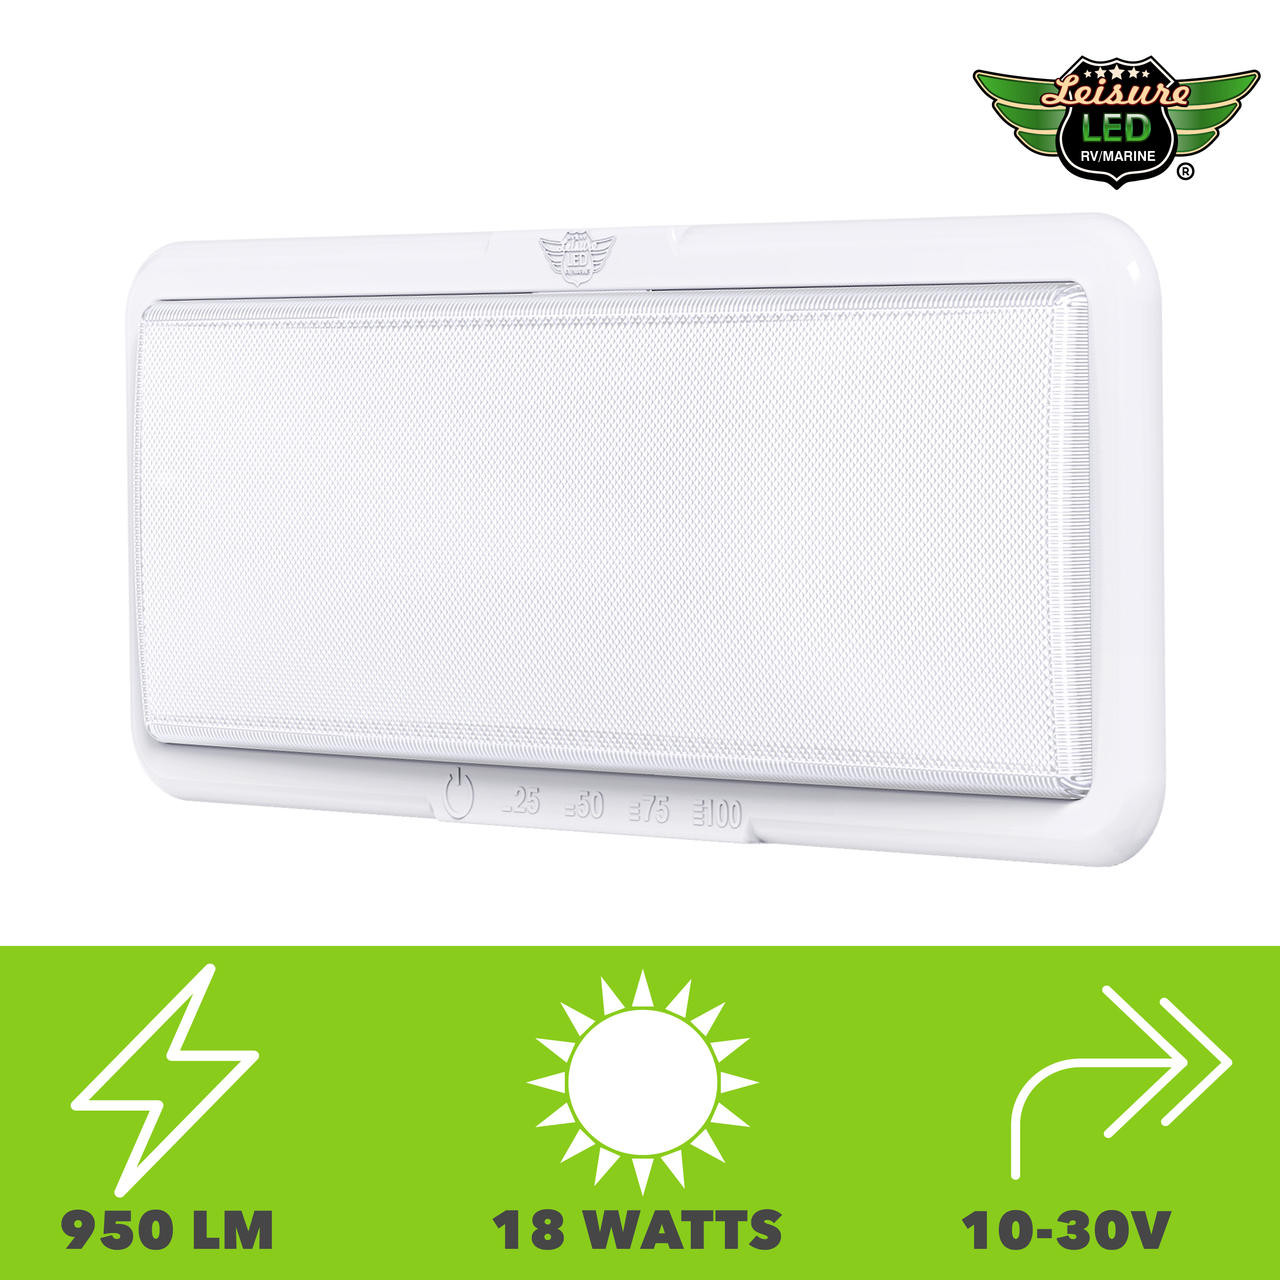 Leisure LED LED RV LED Ceiling Interior Light Fixture 950 Lumen with Touch Dimmer Switch 12V 14 x 5.5 Natural White 4000-4500K With White Trim